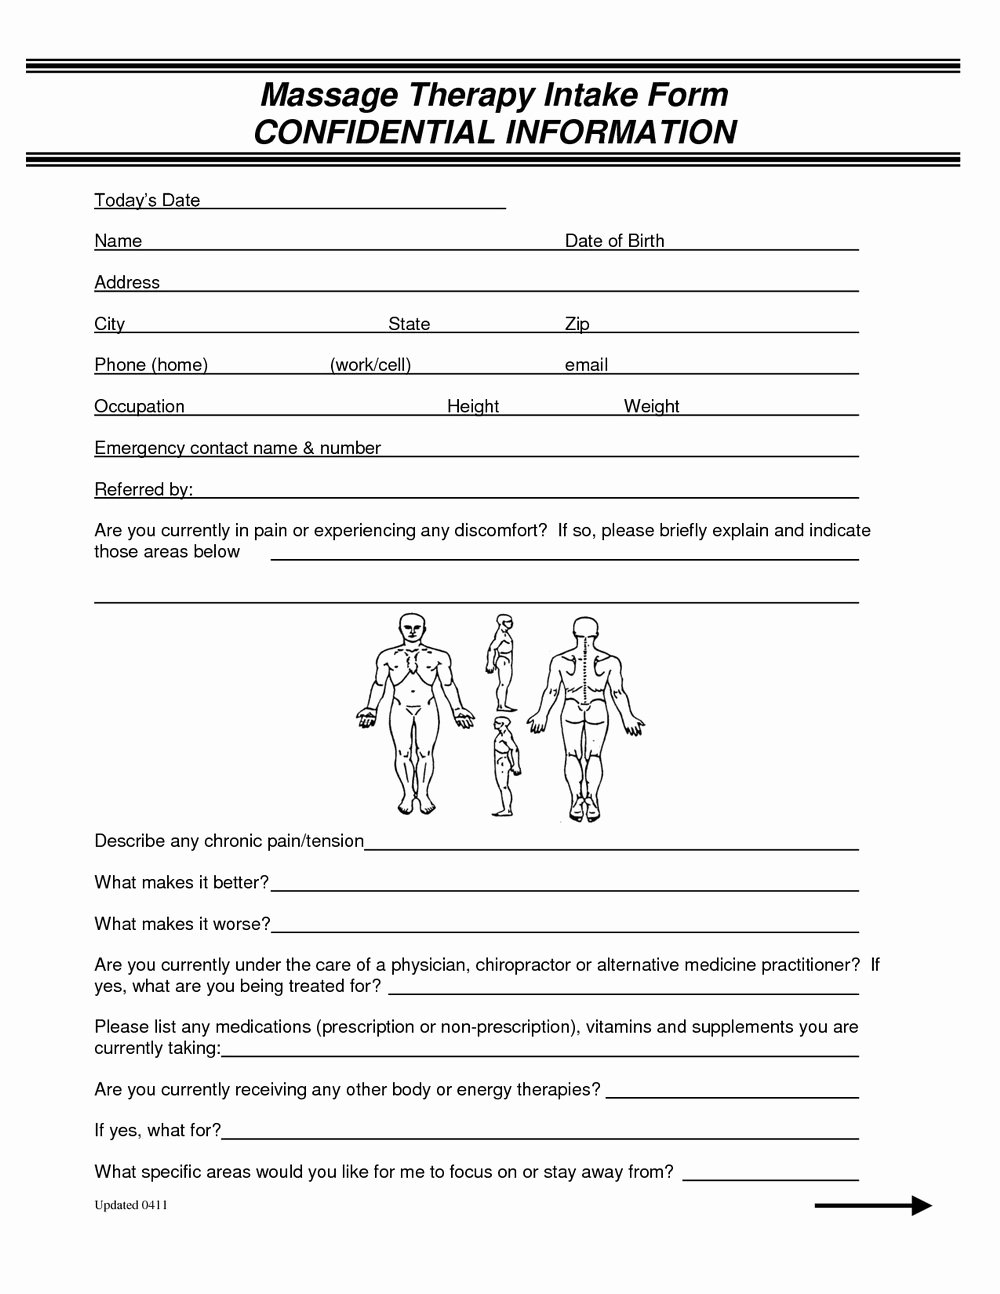 Chiropractic soap Notes Template Luxury Chiropractic Intake forms Doc forms 3330